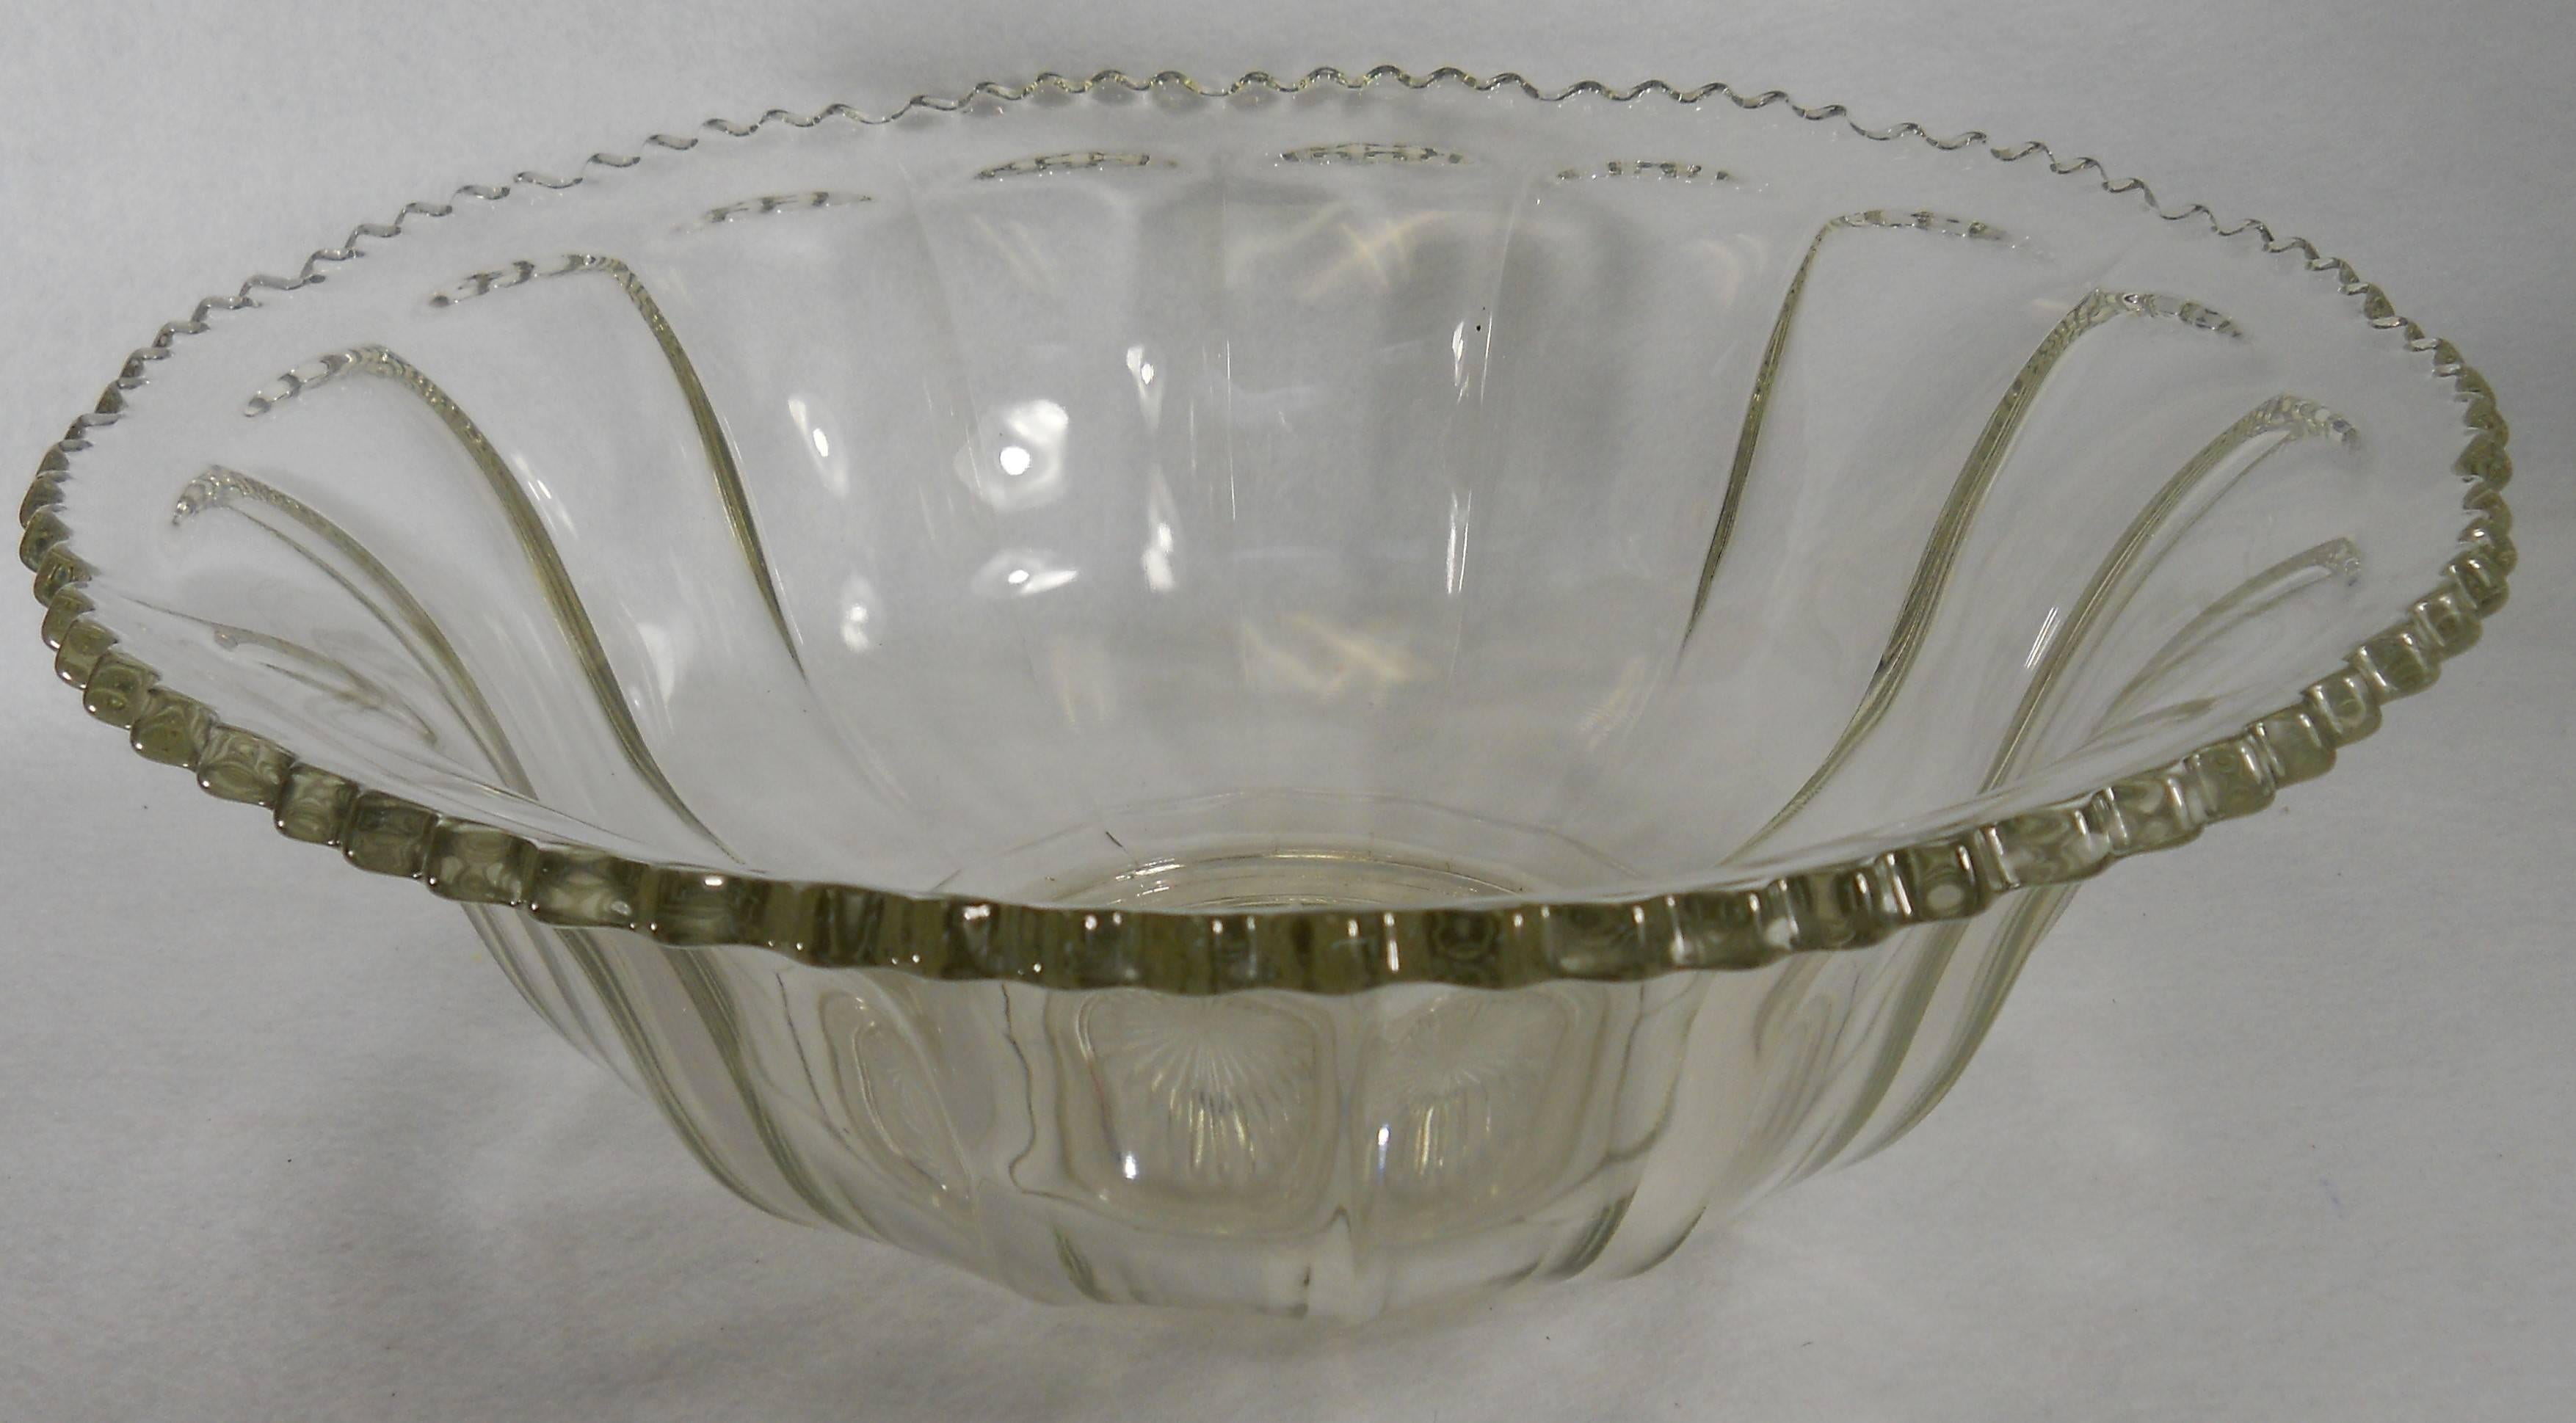 1962 Indiana Glass Co. Colonial Paneled PUNCH BOWL SET w/Scalloped Rim #7115 In Excellent Condition For Sale In St. Petersburg, FL